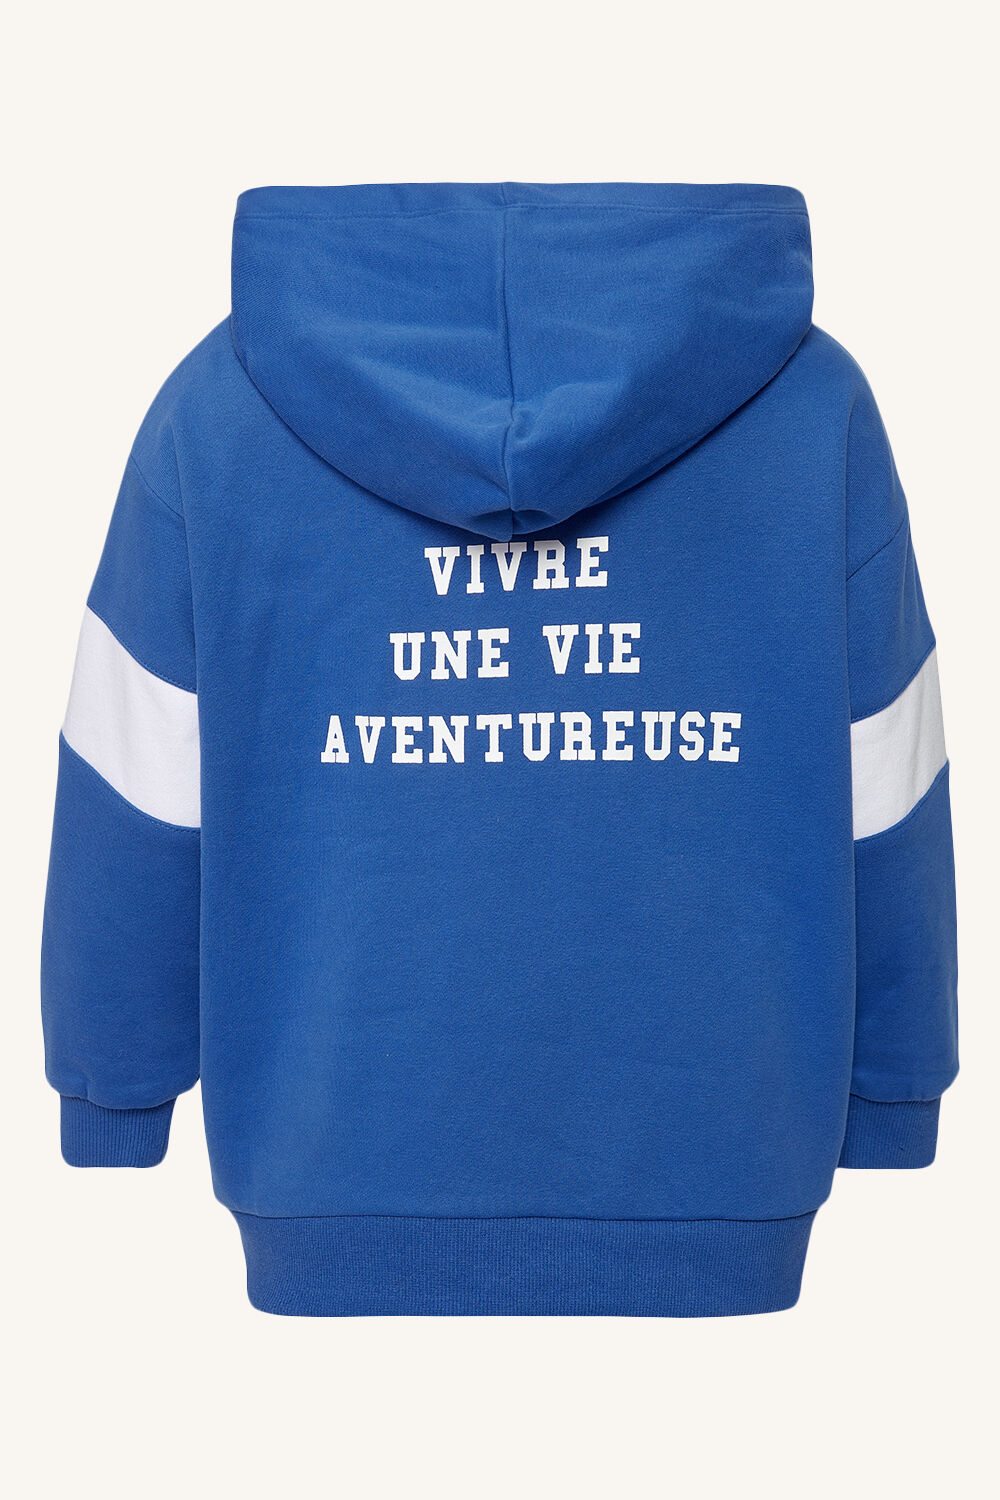 OVERSIZED ADVENTURE HOODIE in colour DAZZLING BLUE